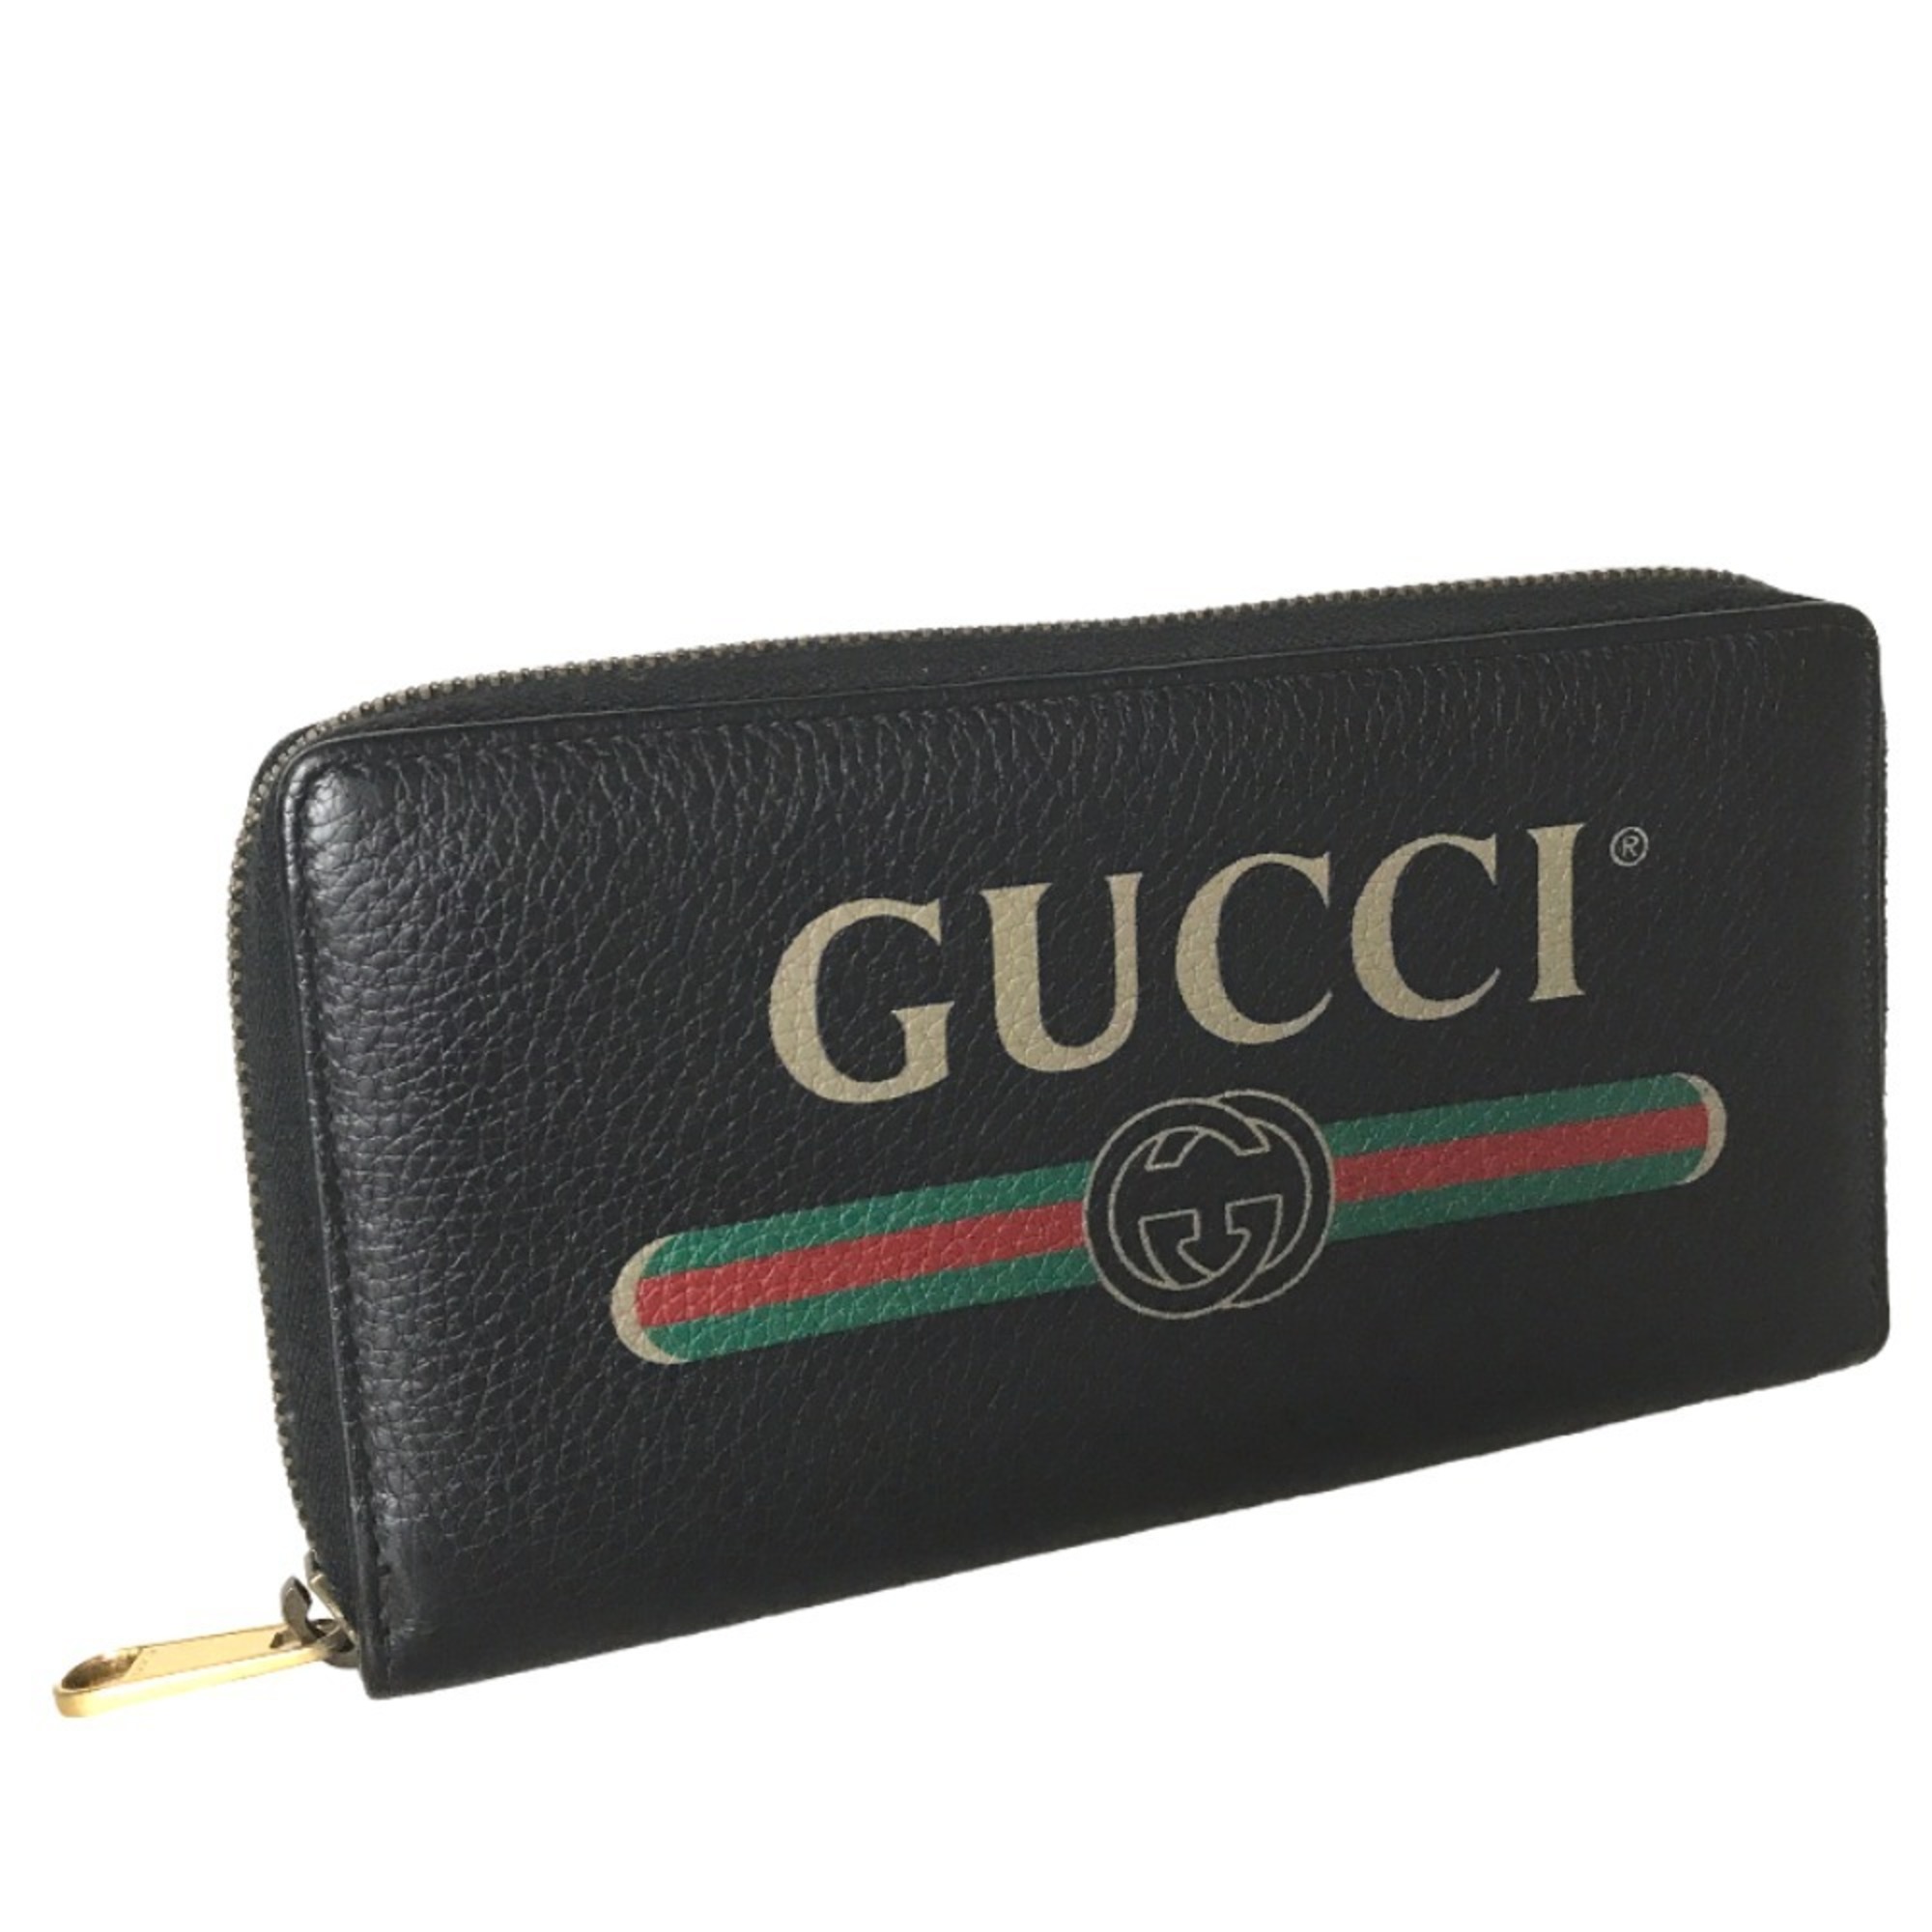 GUCCI Gucci Sherry Line Round Zip Long Wallet Men's Leather Black 496317 0959